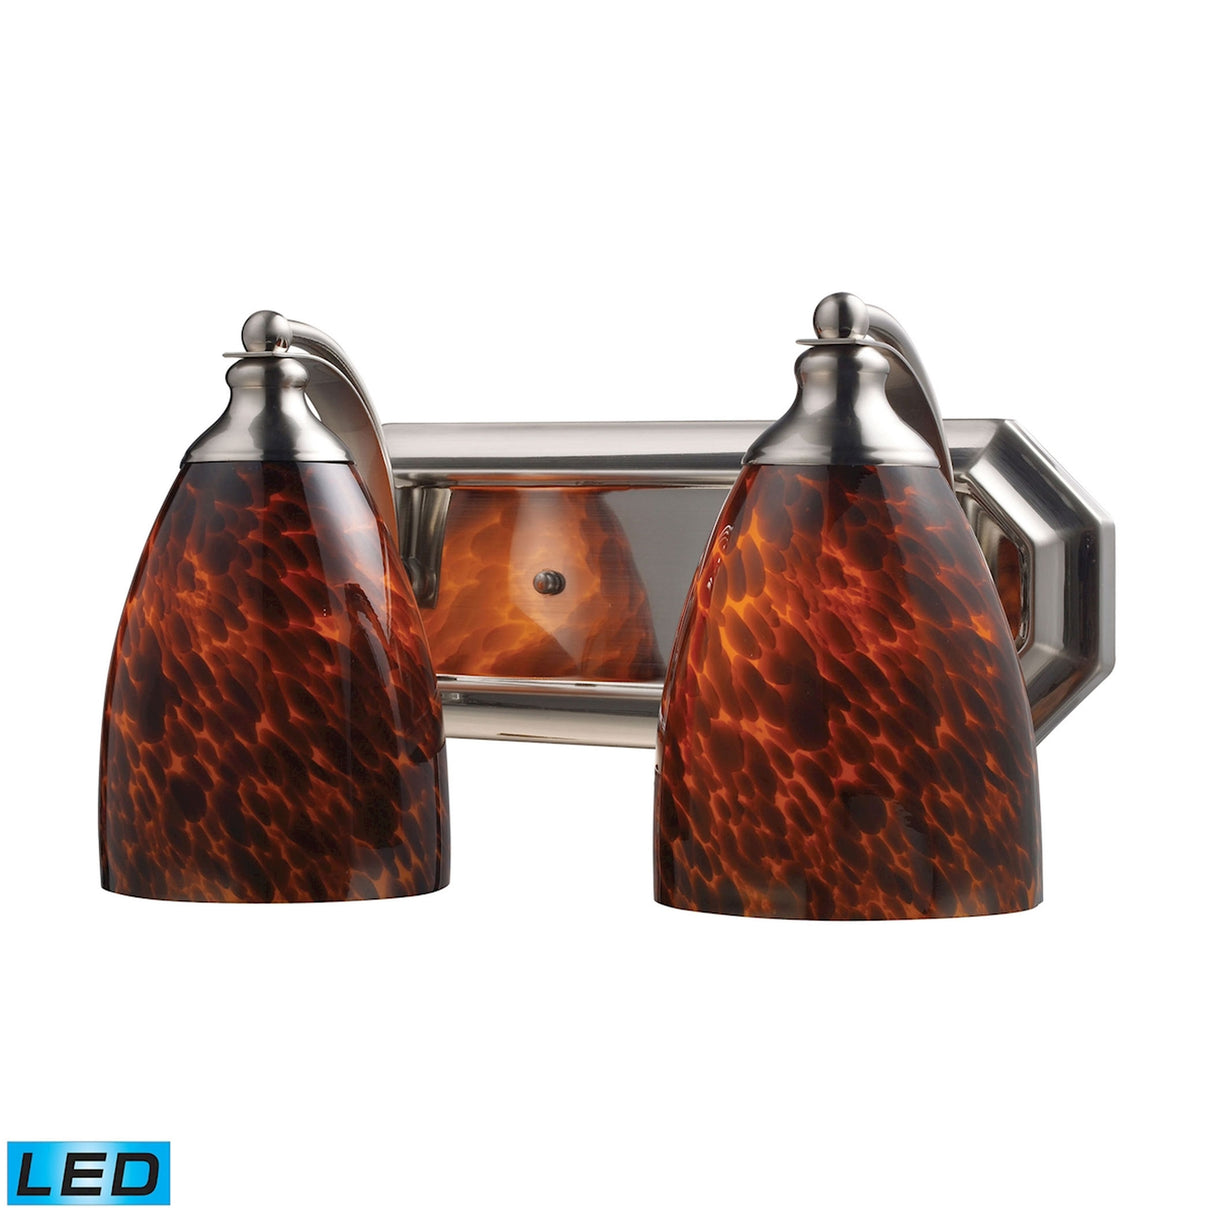 Elk 570-2N-ES-LED Mix-N-Match Vanity 2-Light Wall Lamp in Satin Nickel with Espresso Glass - Includes LED Bulbs